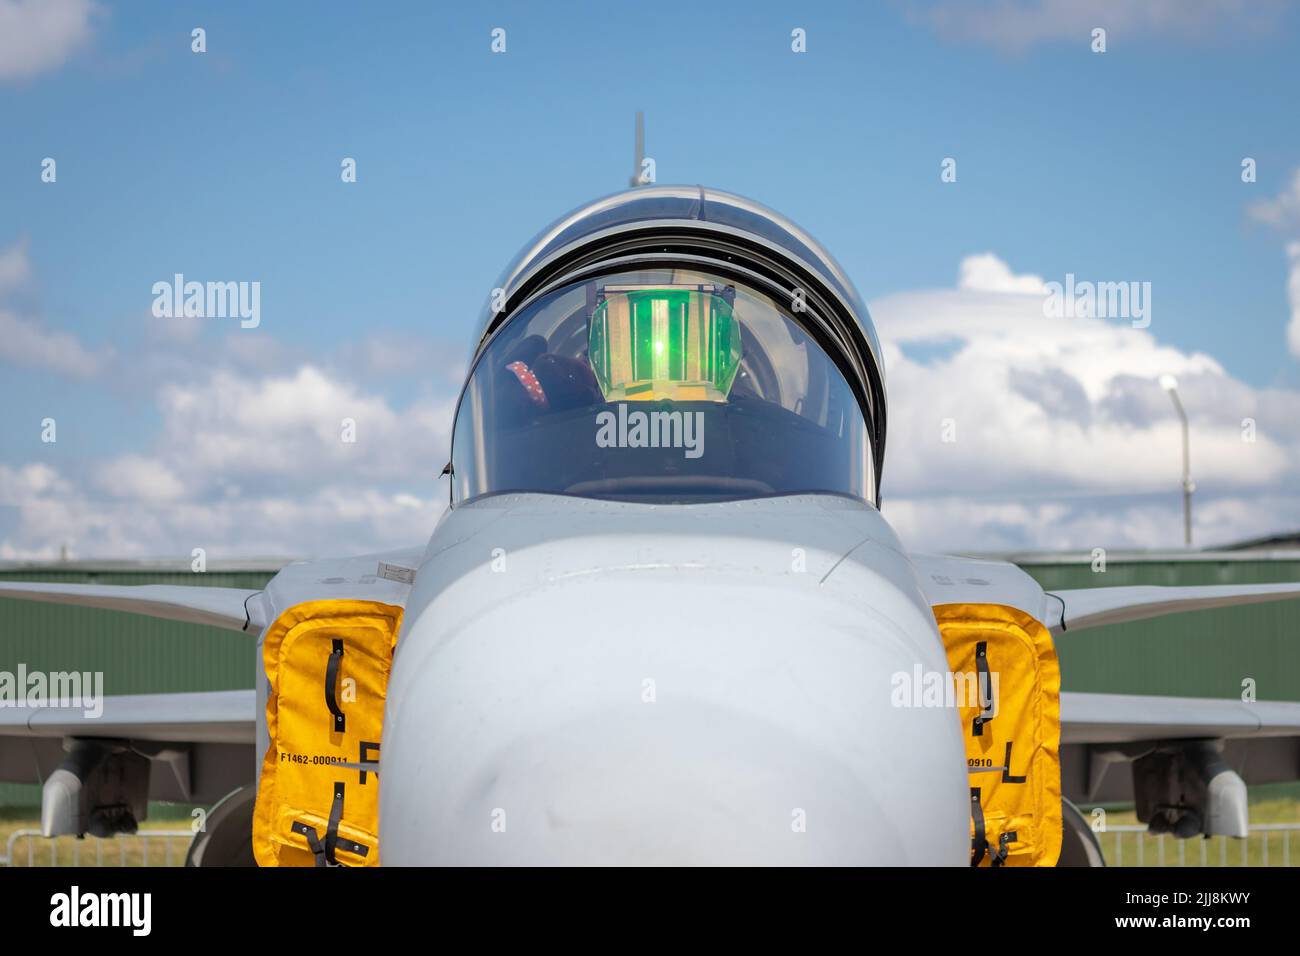 SIAULIAI / LITHUANIA - July 27, 2019: Saab JAS 39 Gripen fighter jet aircraft static display at air show Falcon Wings 2019 in Siauliai Air Base Stock Photo